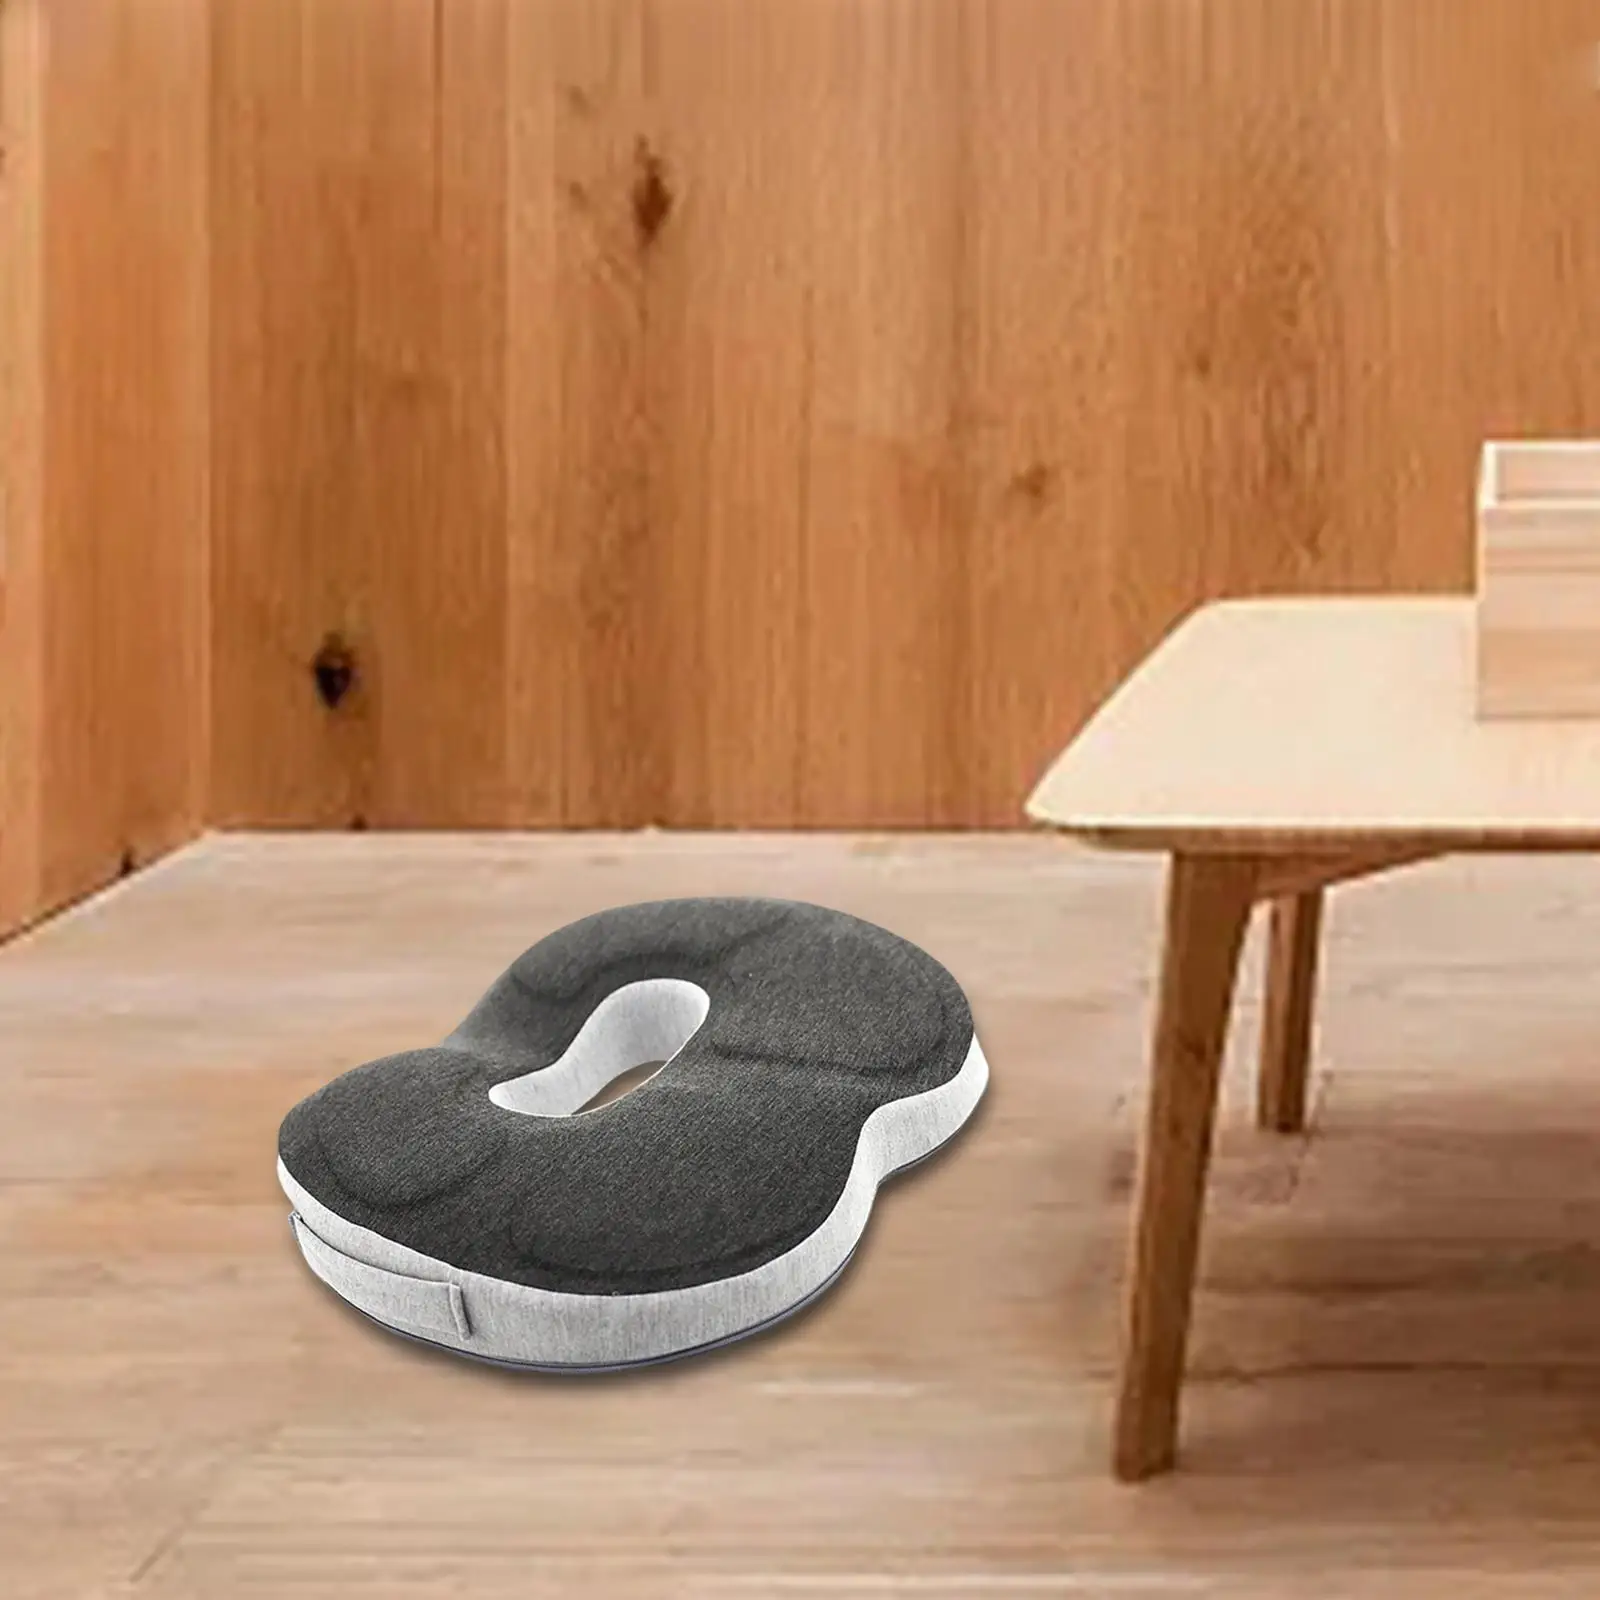 Breathable Donut Seat Cushion Comfortable Washable Cover Donut Pillow Chair Cushion Seat Cushion for Travel car Chair